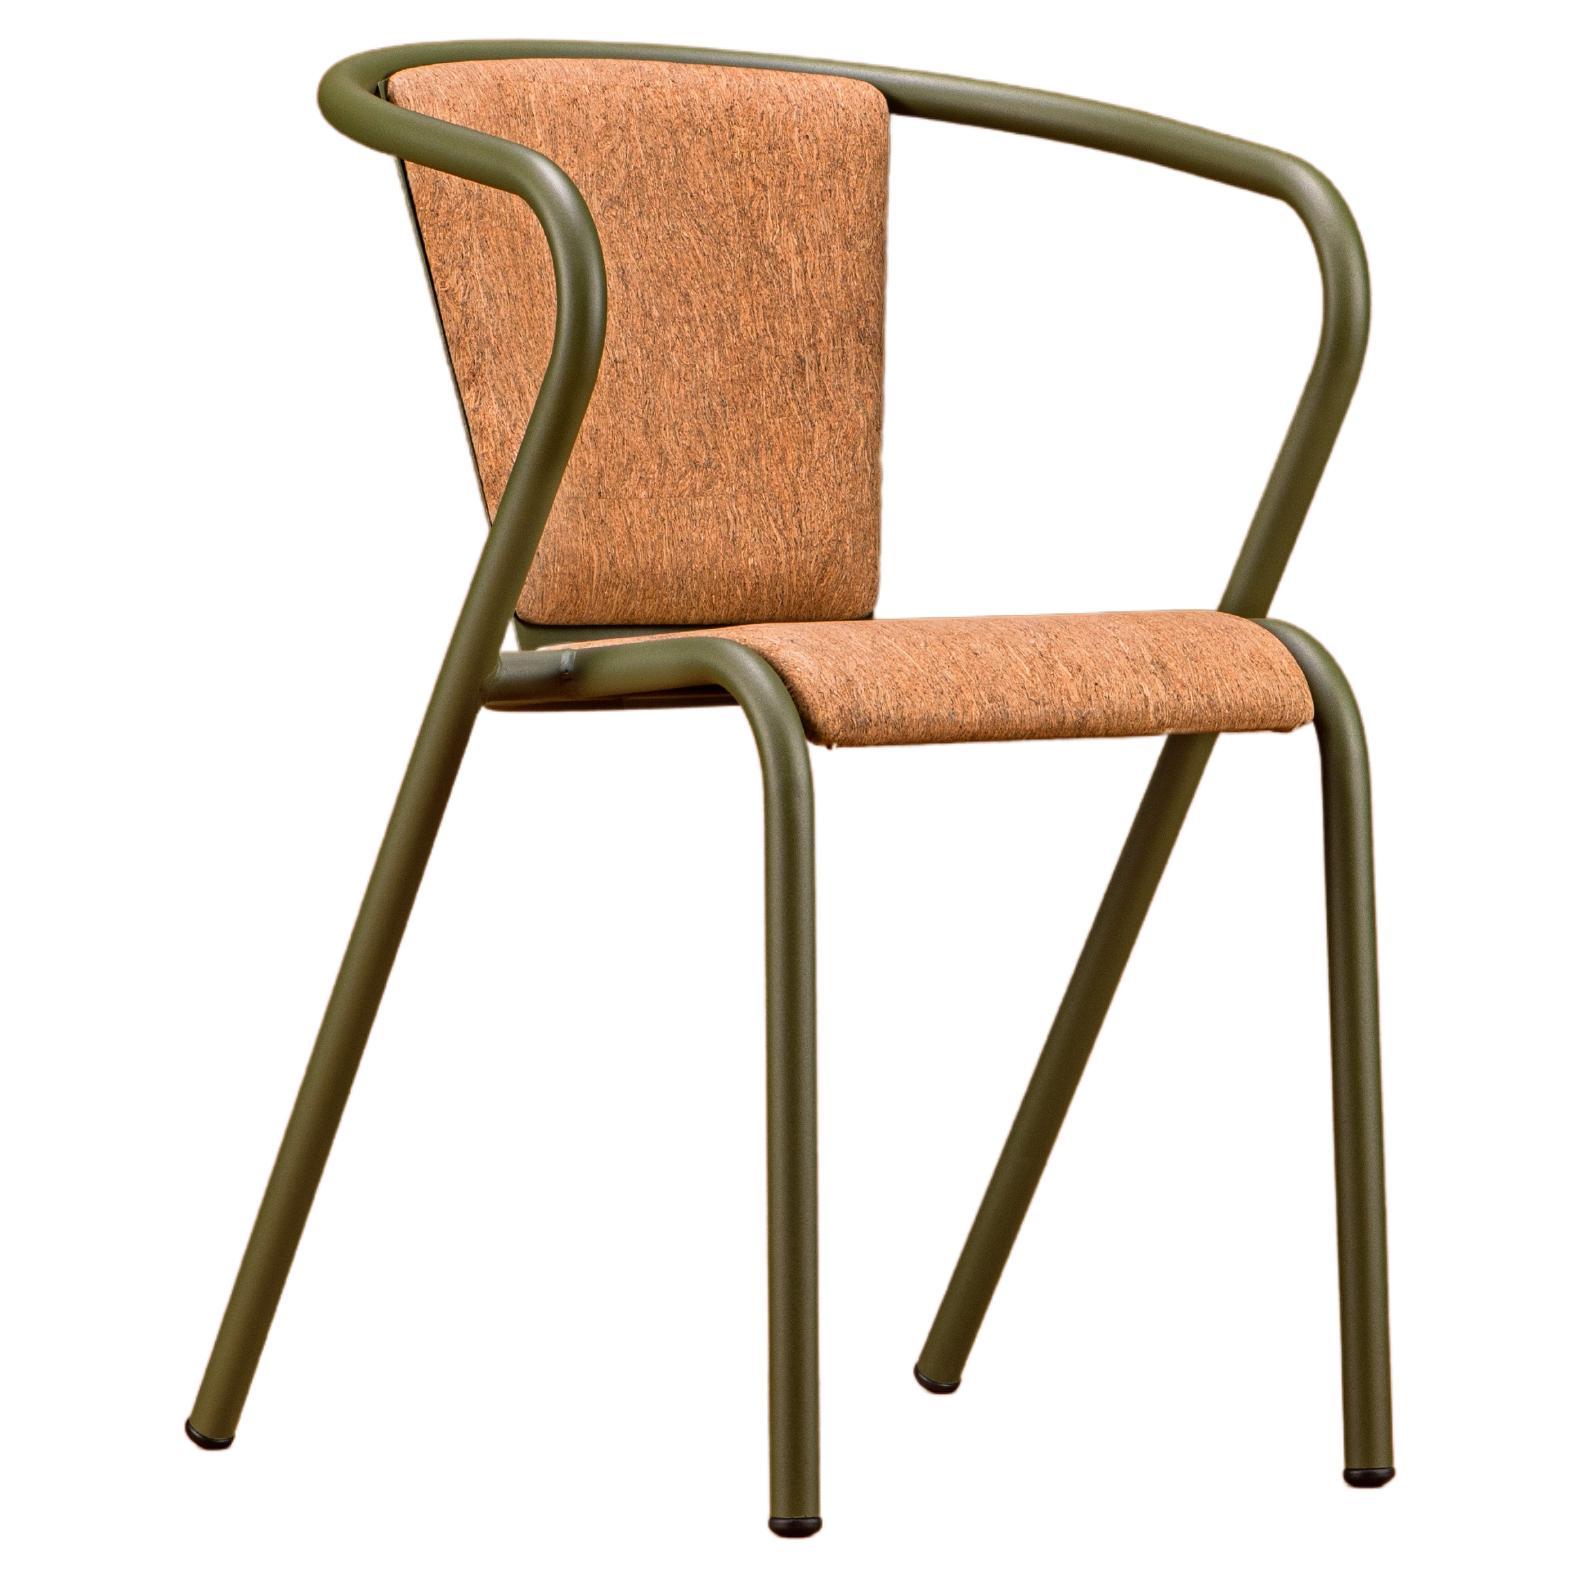 BICAchair Modern Steel Armchair Olive, Upholstery in Natural Cork For Sale